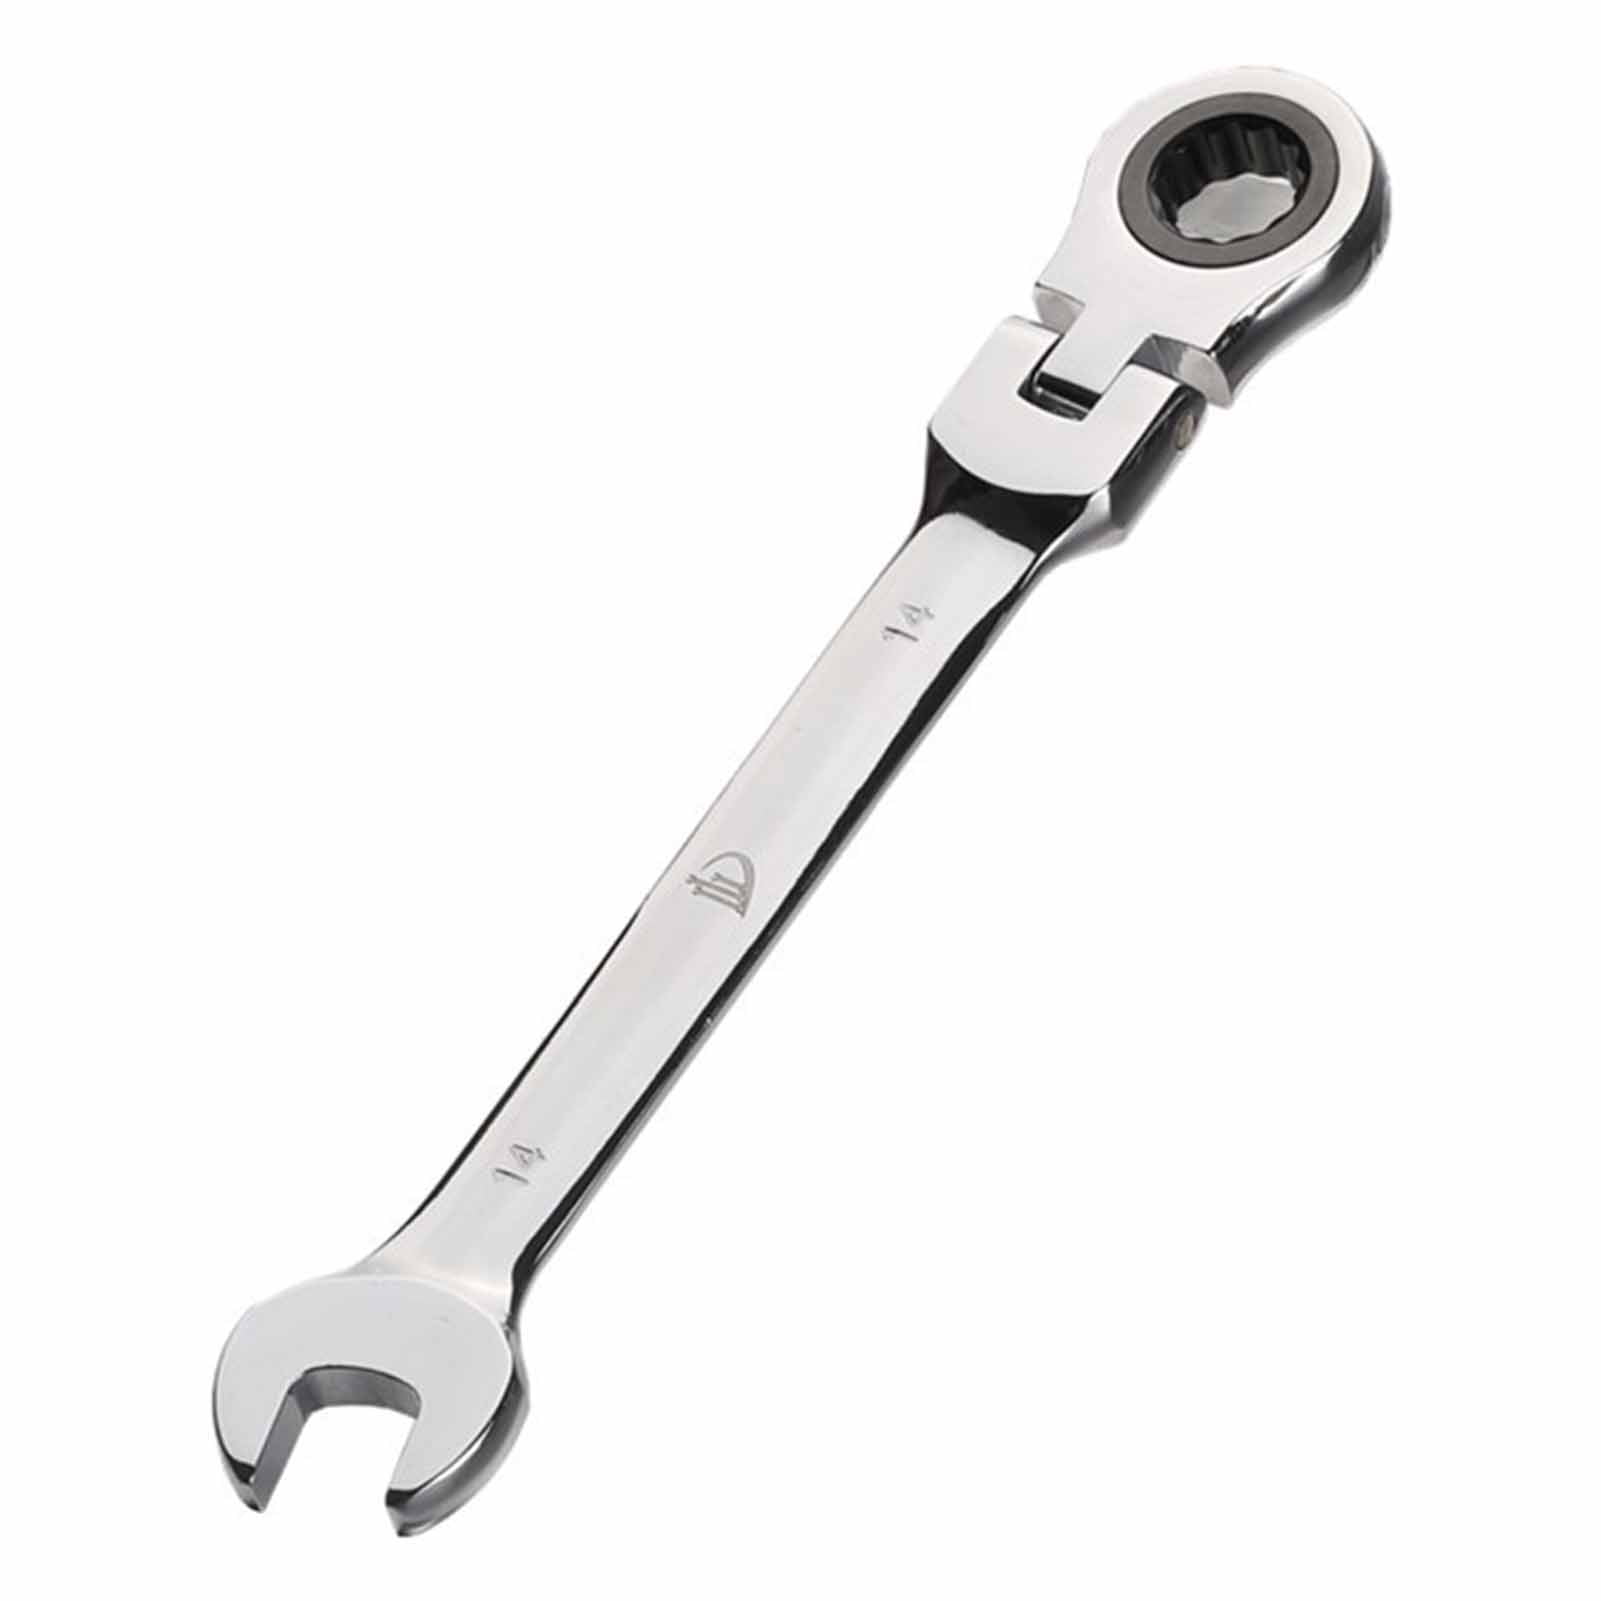 Professional Hand Repair Tool Appliances 8MM Ratchet Wrench Ratchet Combination Wrench for Car Maintenance 